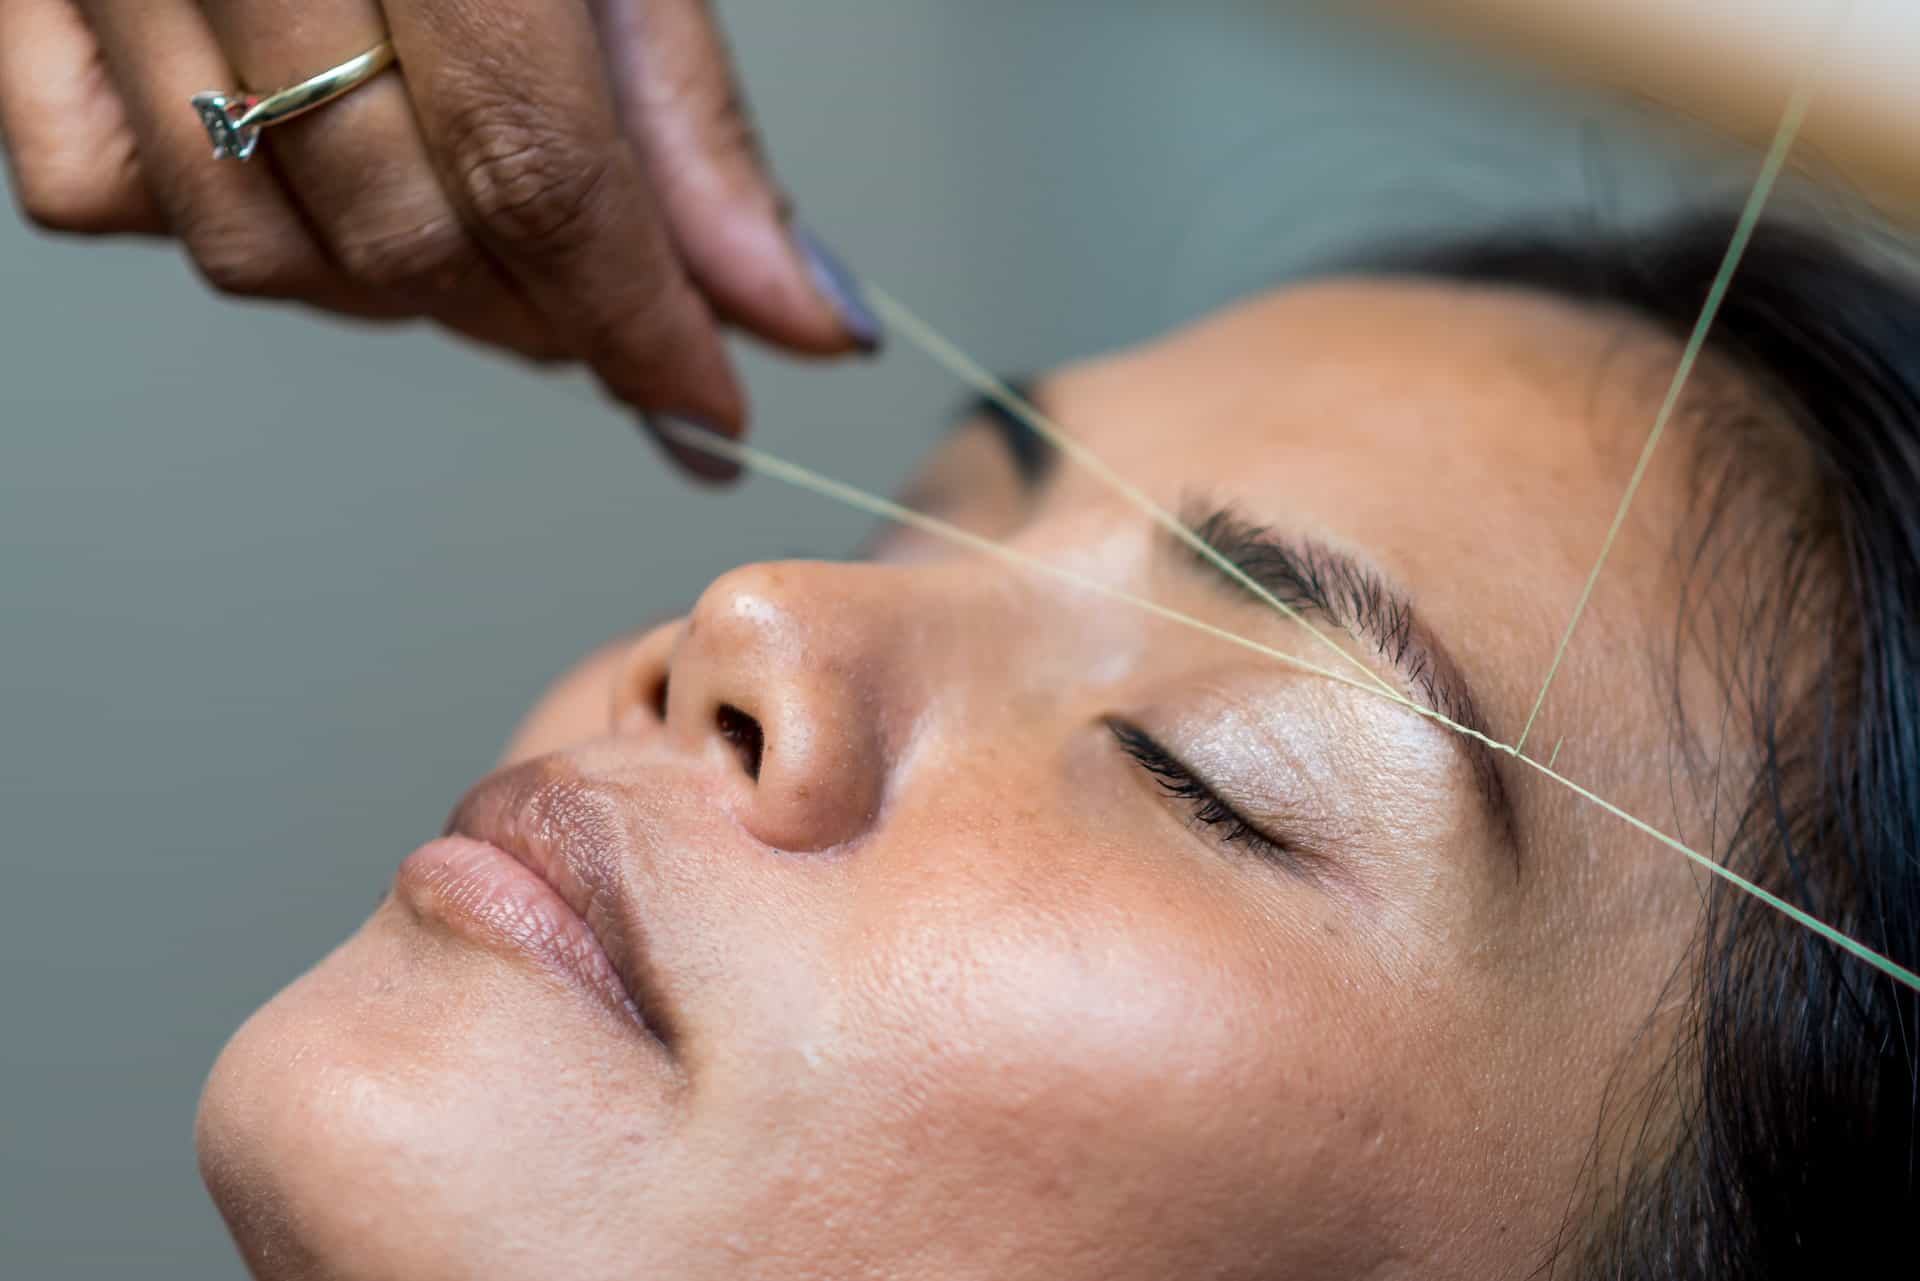 Eyebrow treatments. Check which ones will work for you